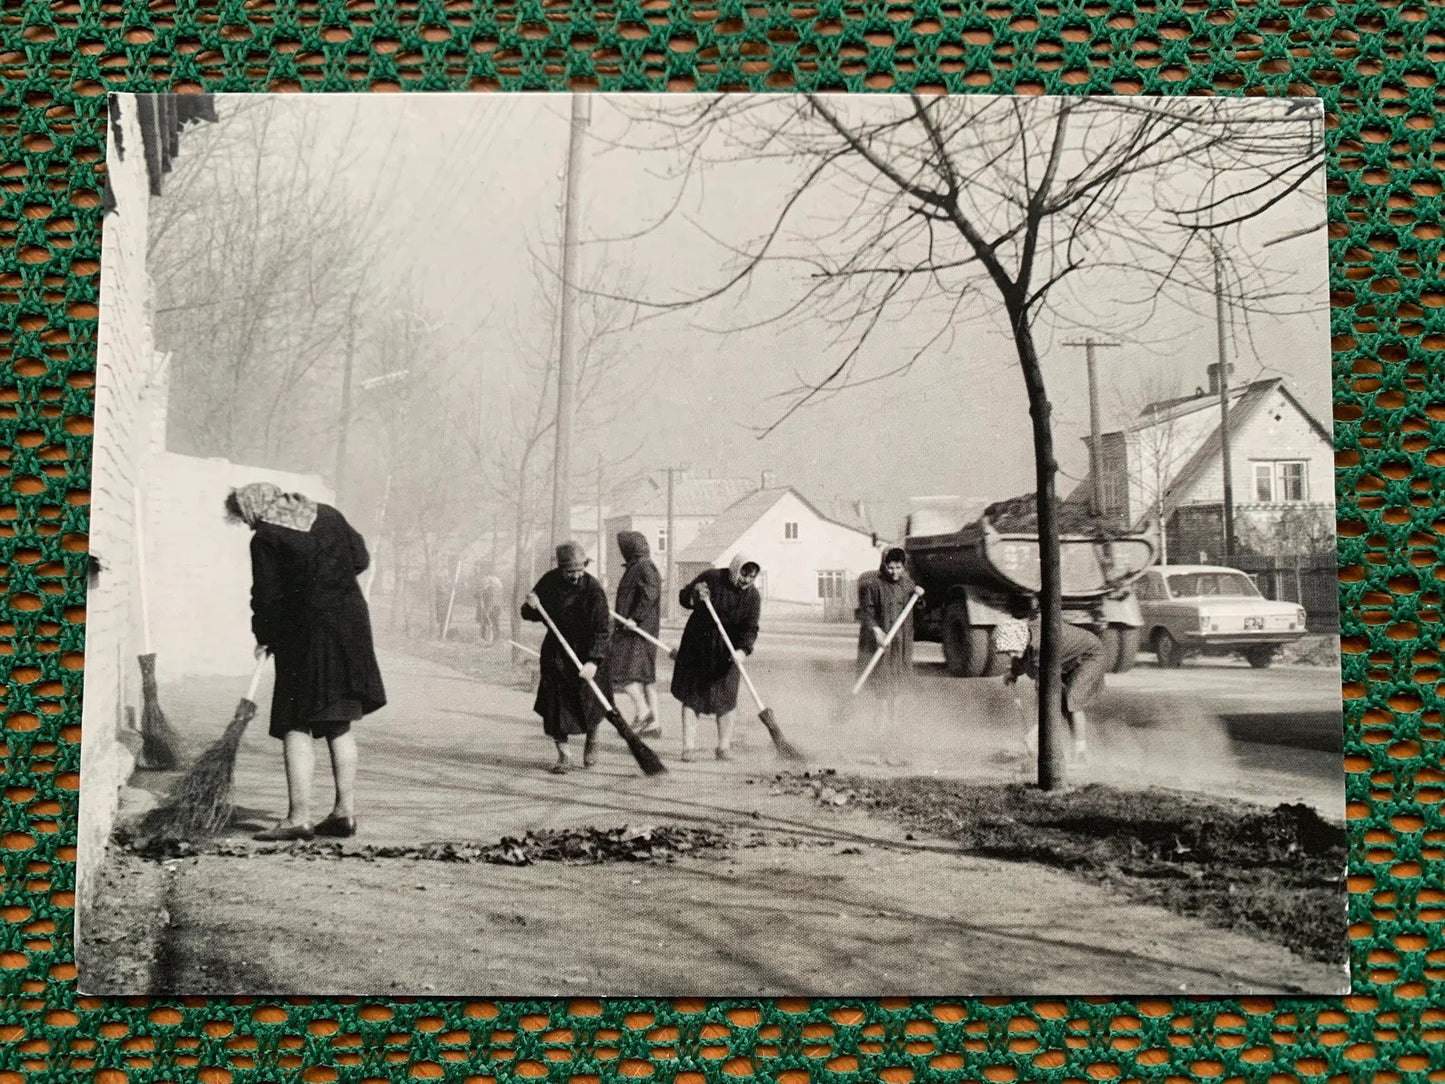 Latvian postcard of Soviet-time Saturday labor cleaning event in Daugavpils Street on 20 April 1976 - Soviet tradition Life in USSR - Soviet people - Printed in 2000s